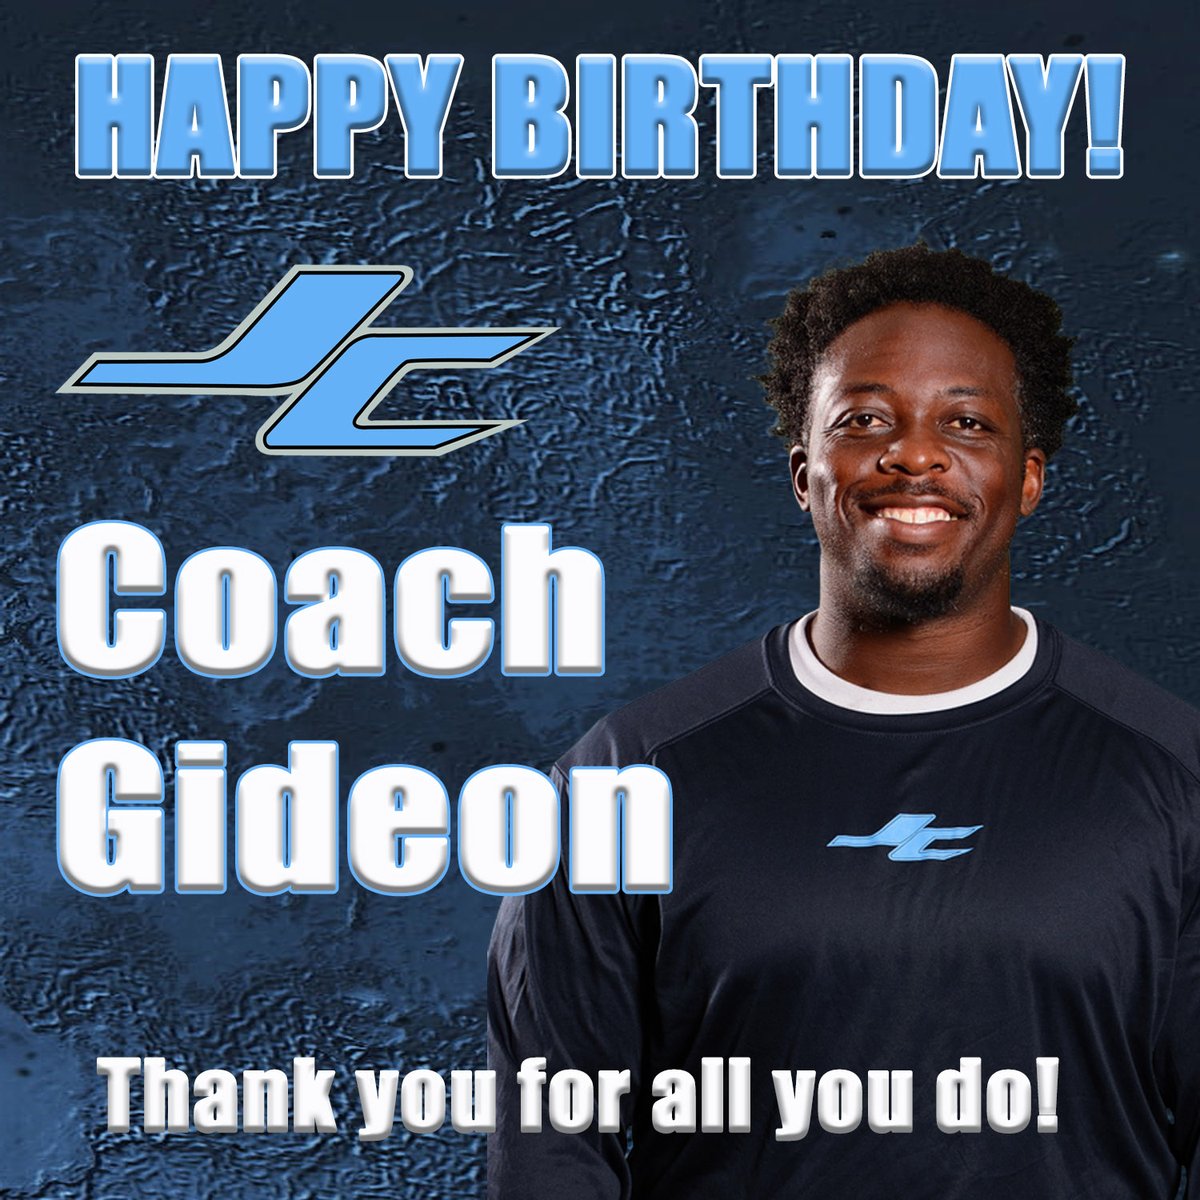 Please join us in wishing @Coach_Gideon34 a Very Happy Birthday! Thank you Coach for all you do for the JETS!!!